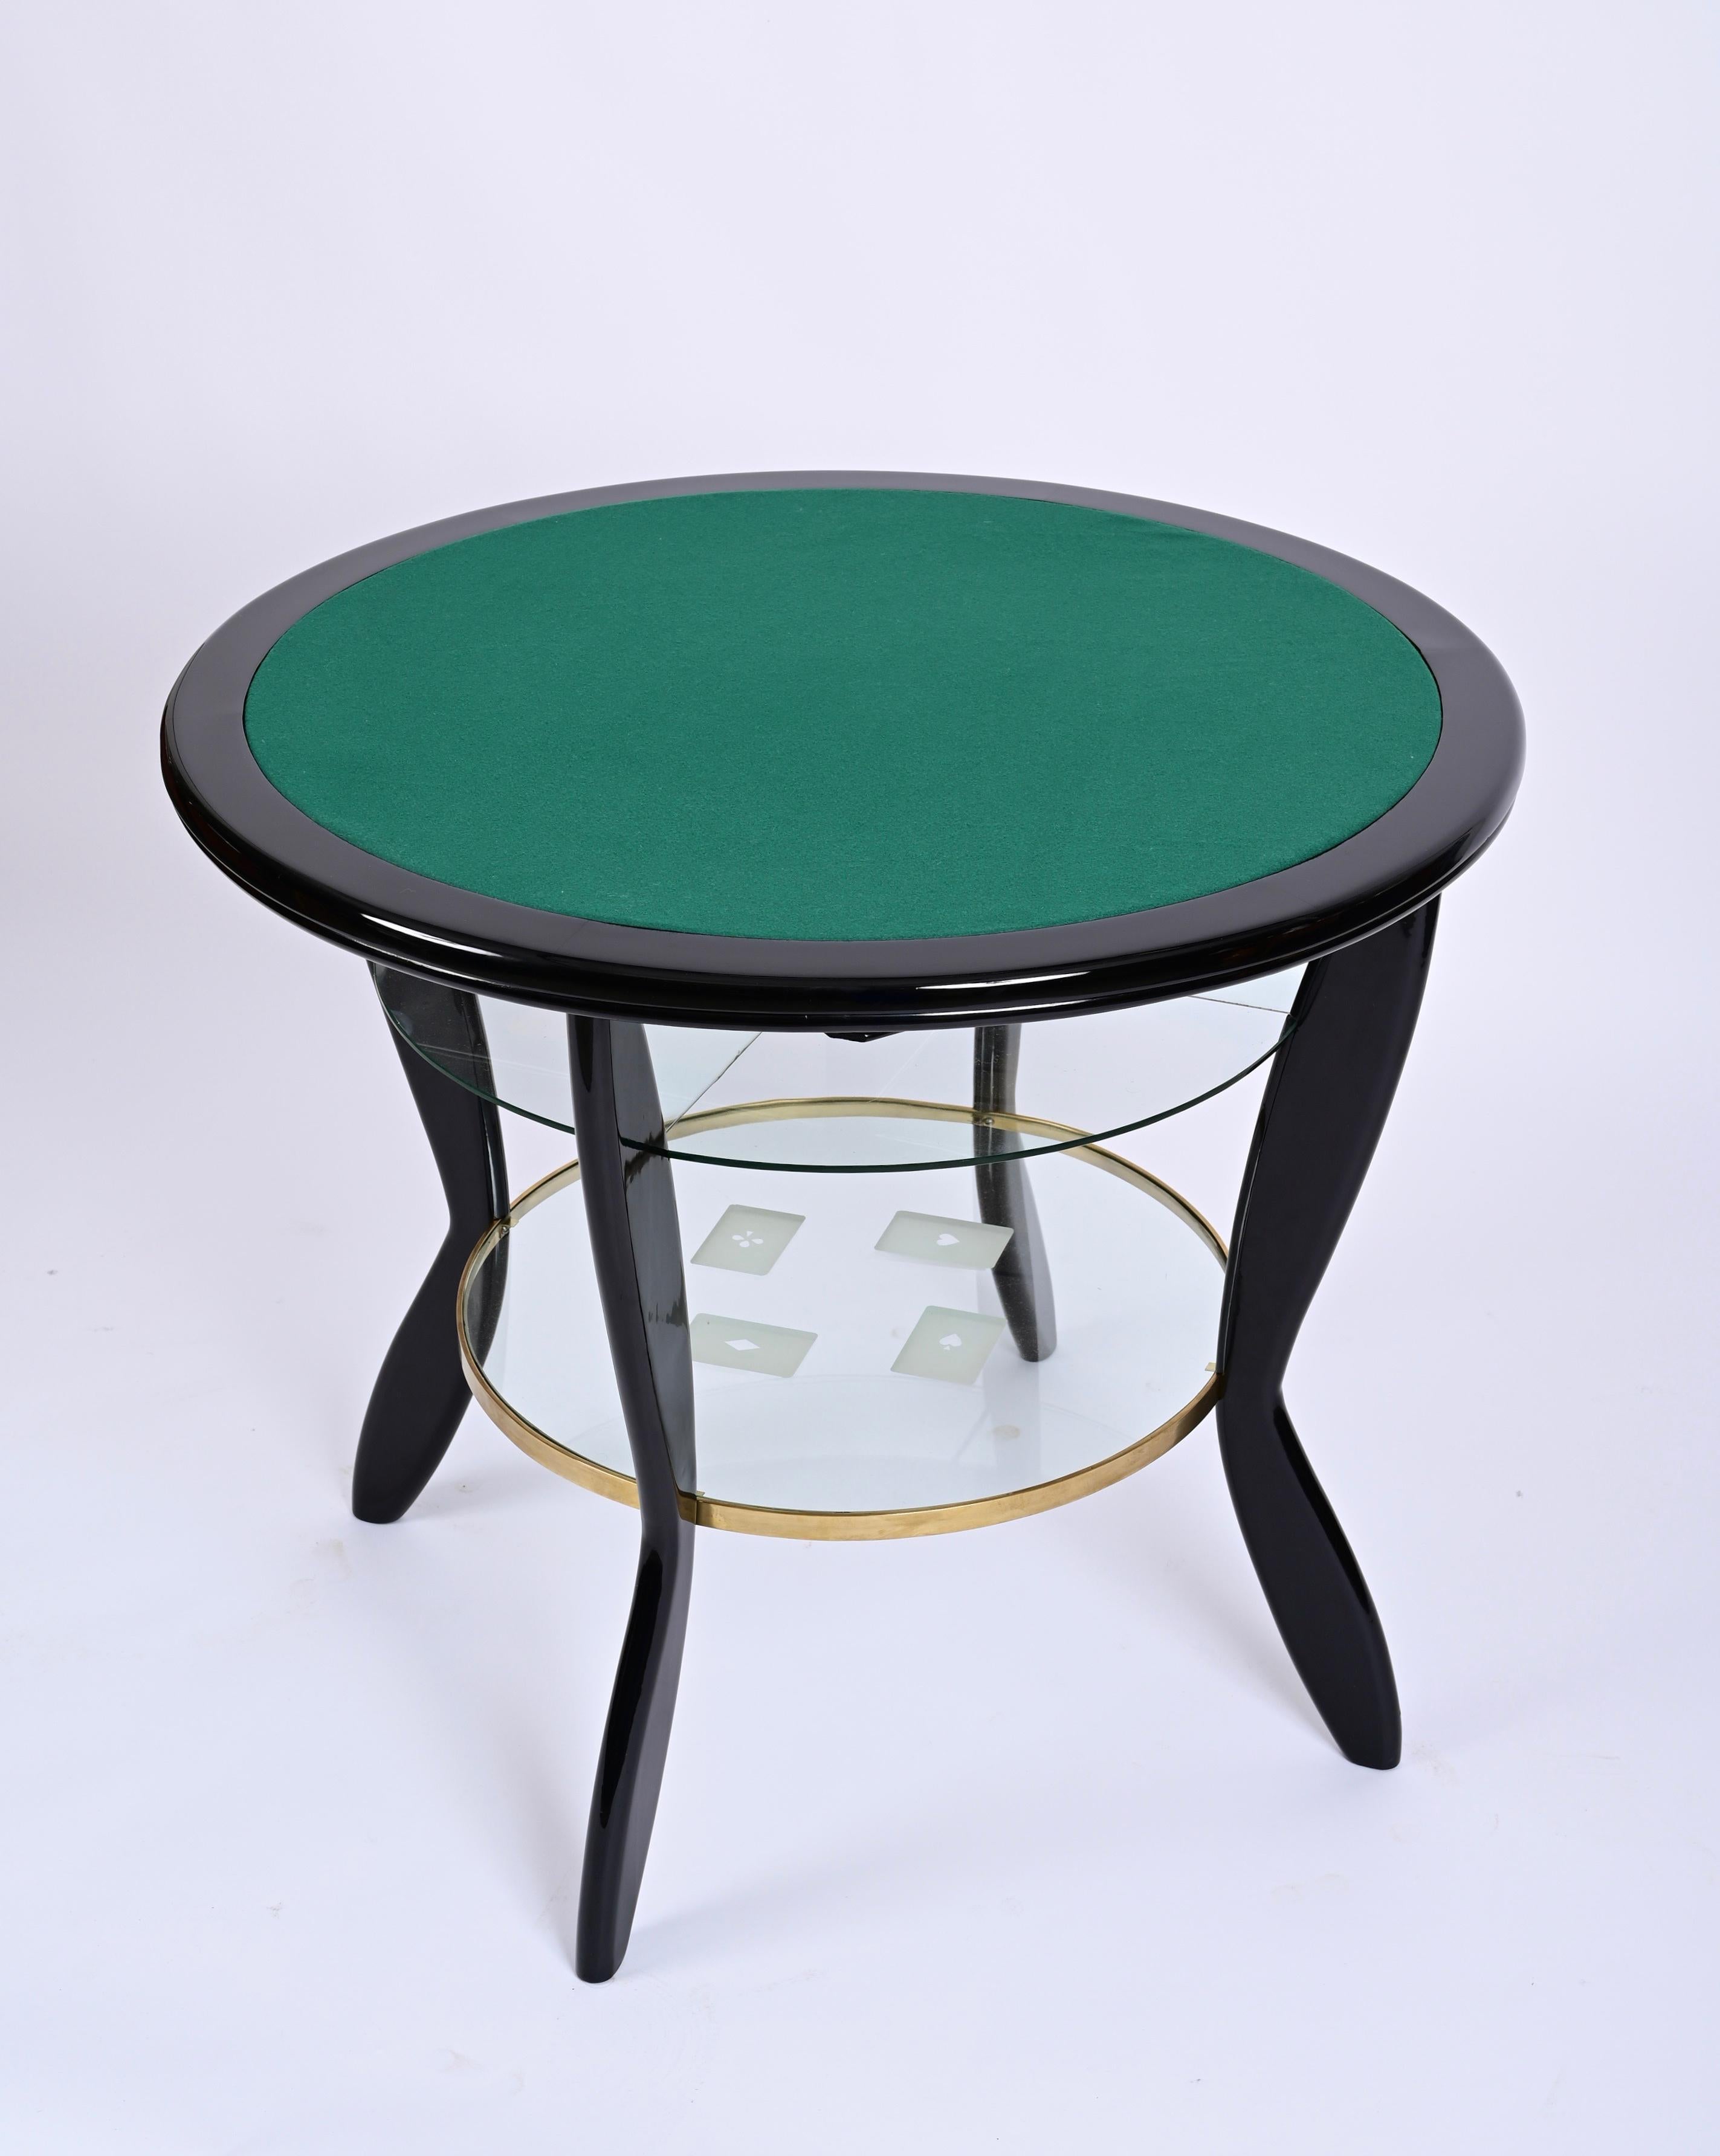 Gio Ponti Style Ebonized Beech and Brass Italian Game Table with Glass, 1950s For Sale 4